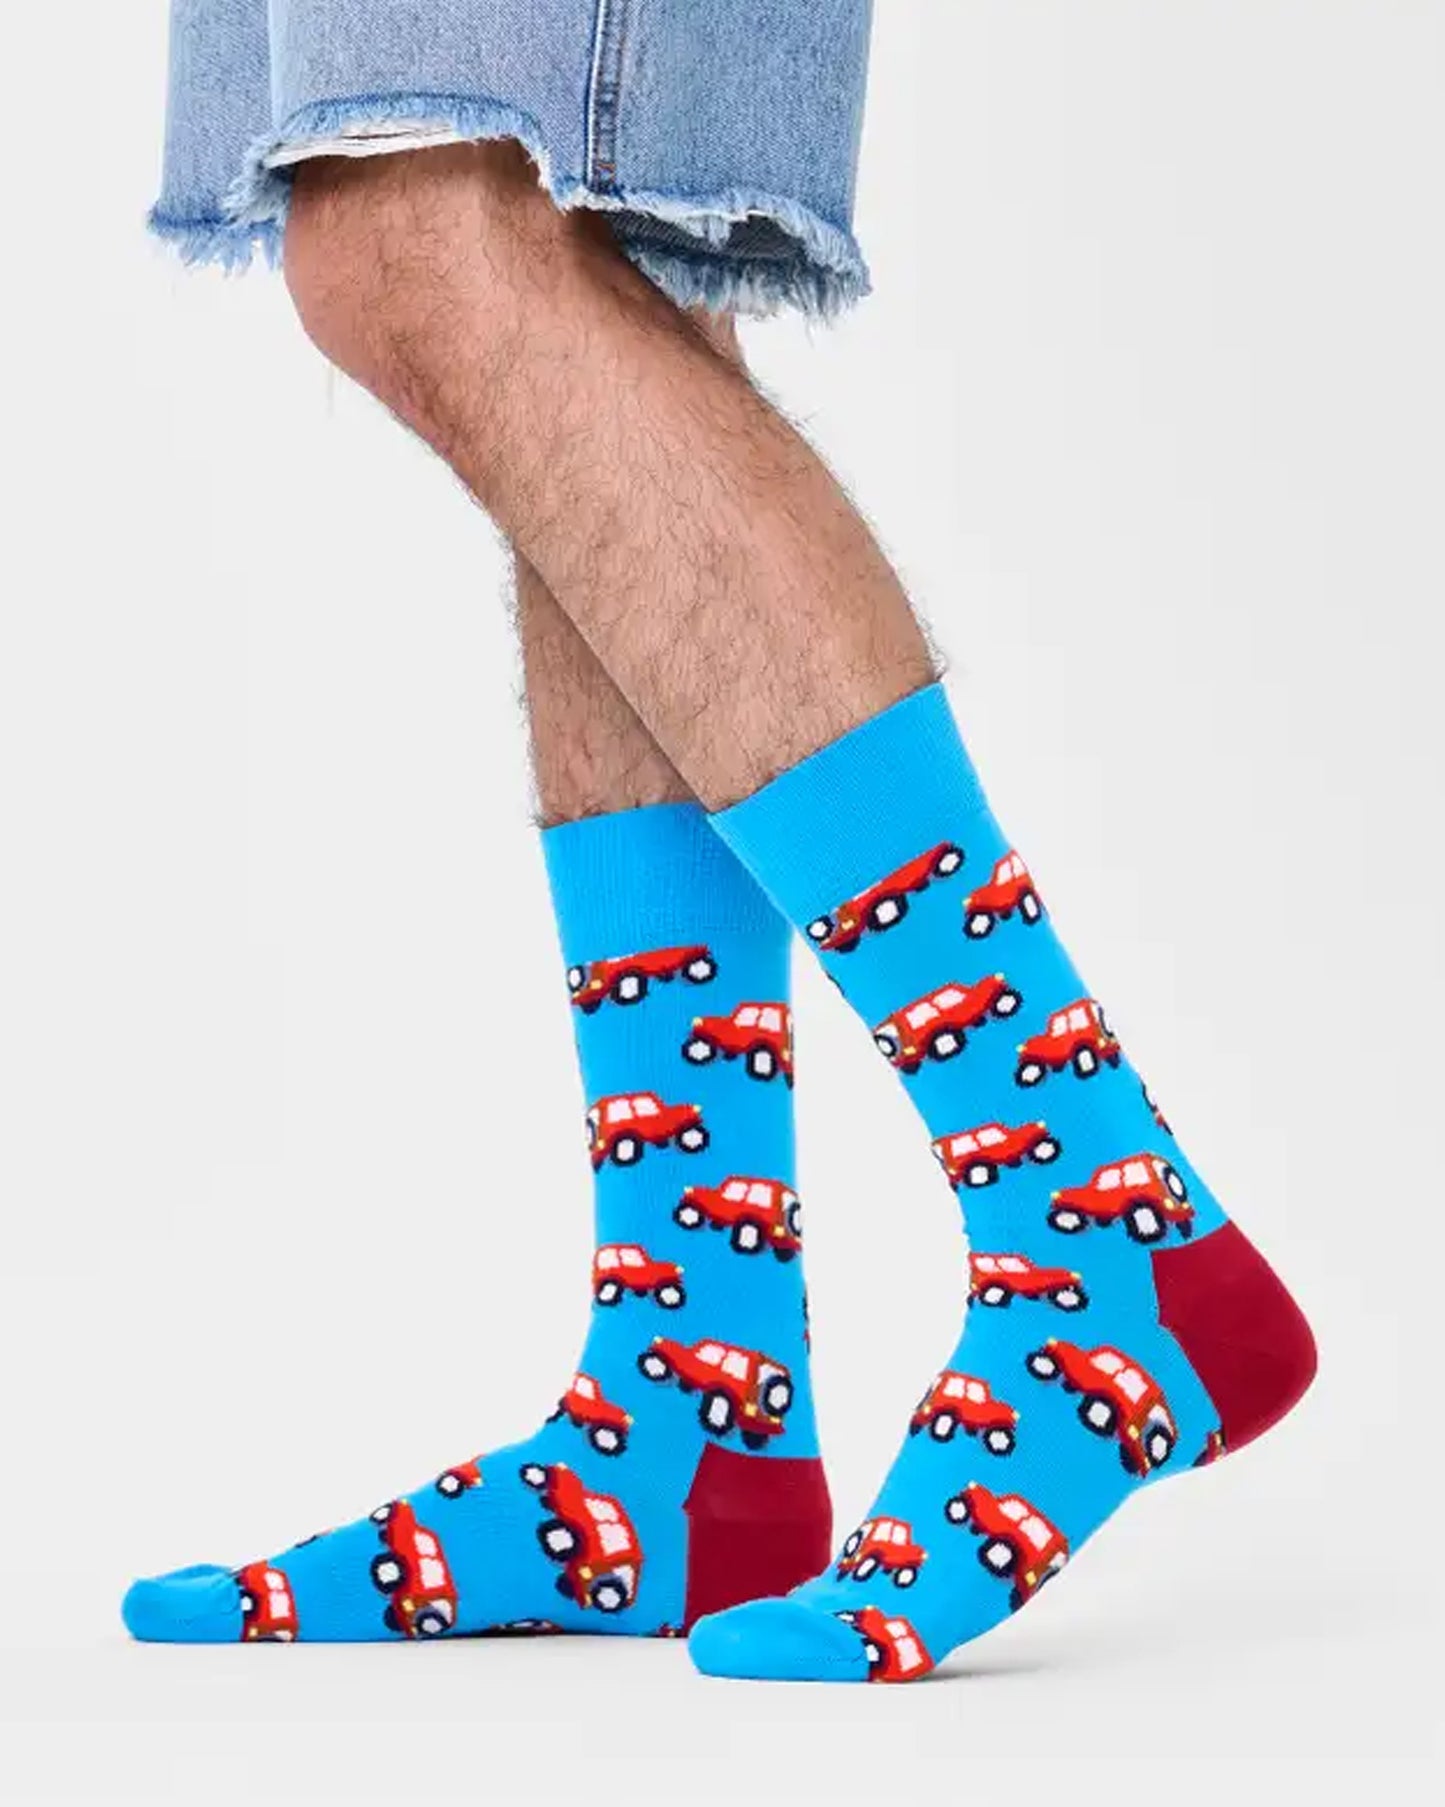 Happy Socks SUV Sock - Light blue crew cotton socks with an all over SUV type car pattern in shades of red and cream, worn by a man wearing cut off denim shorts